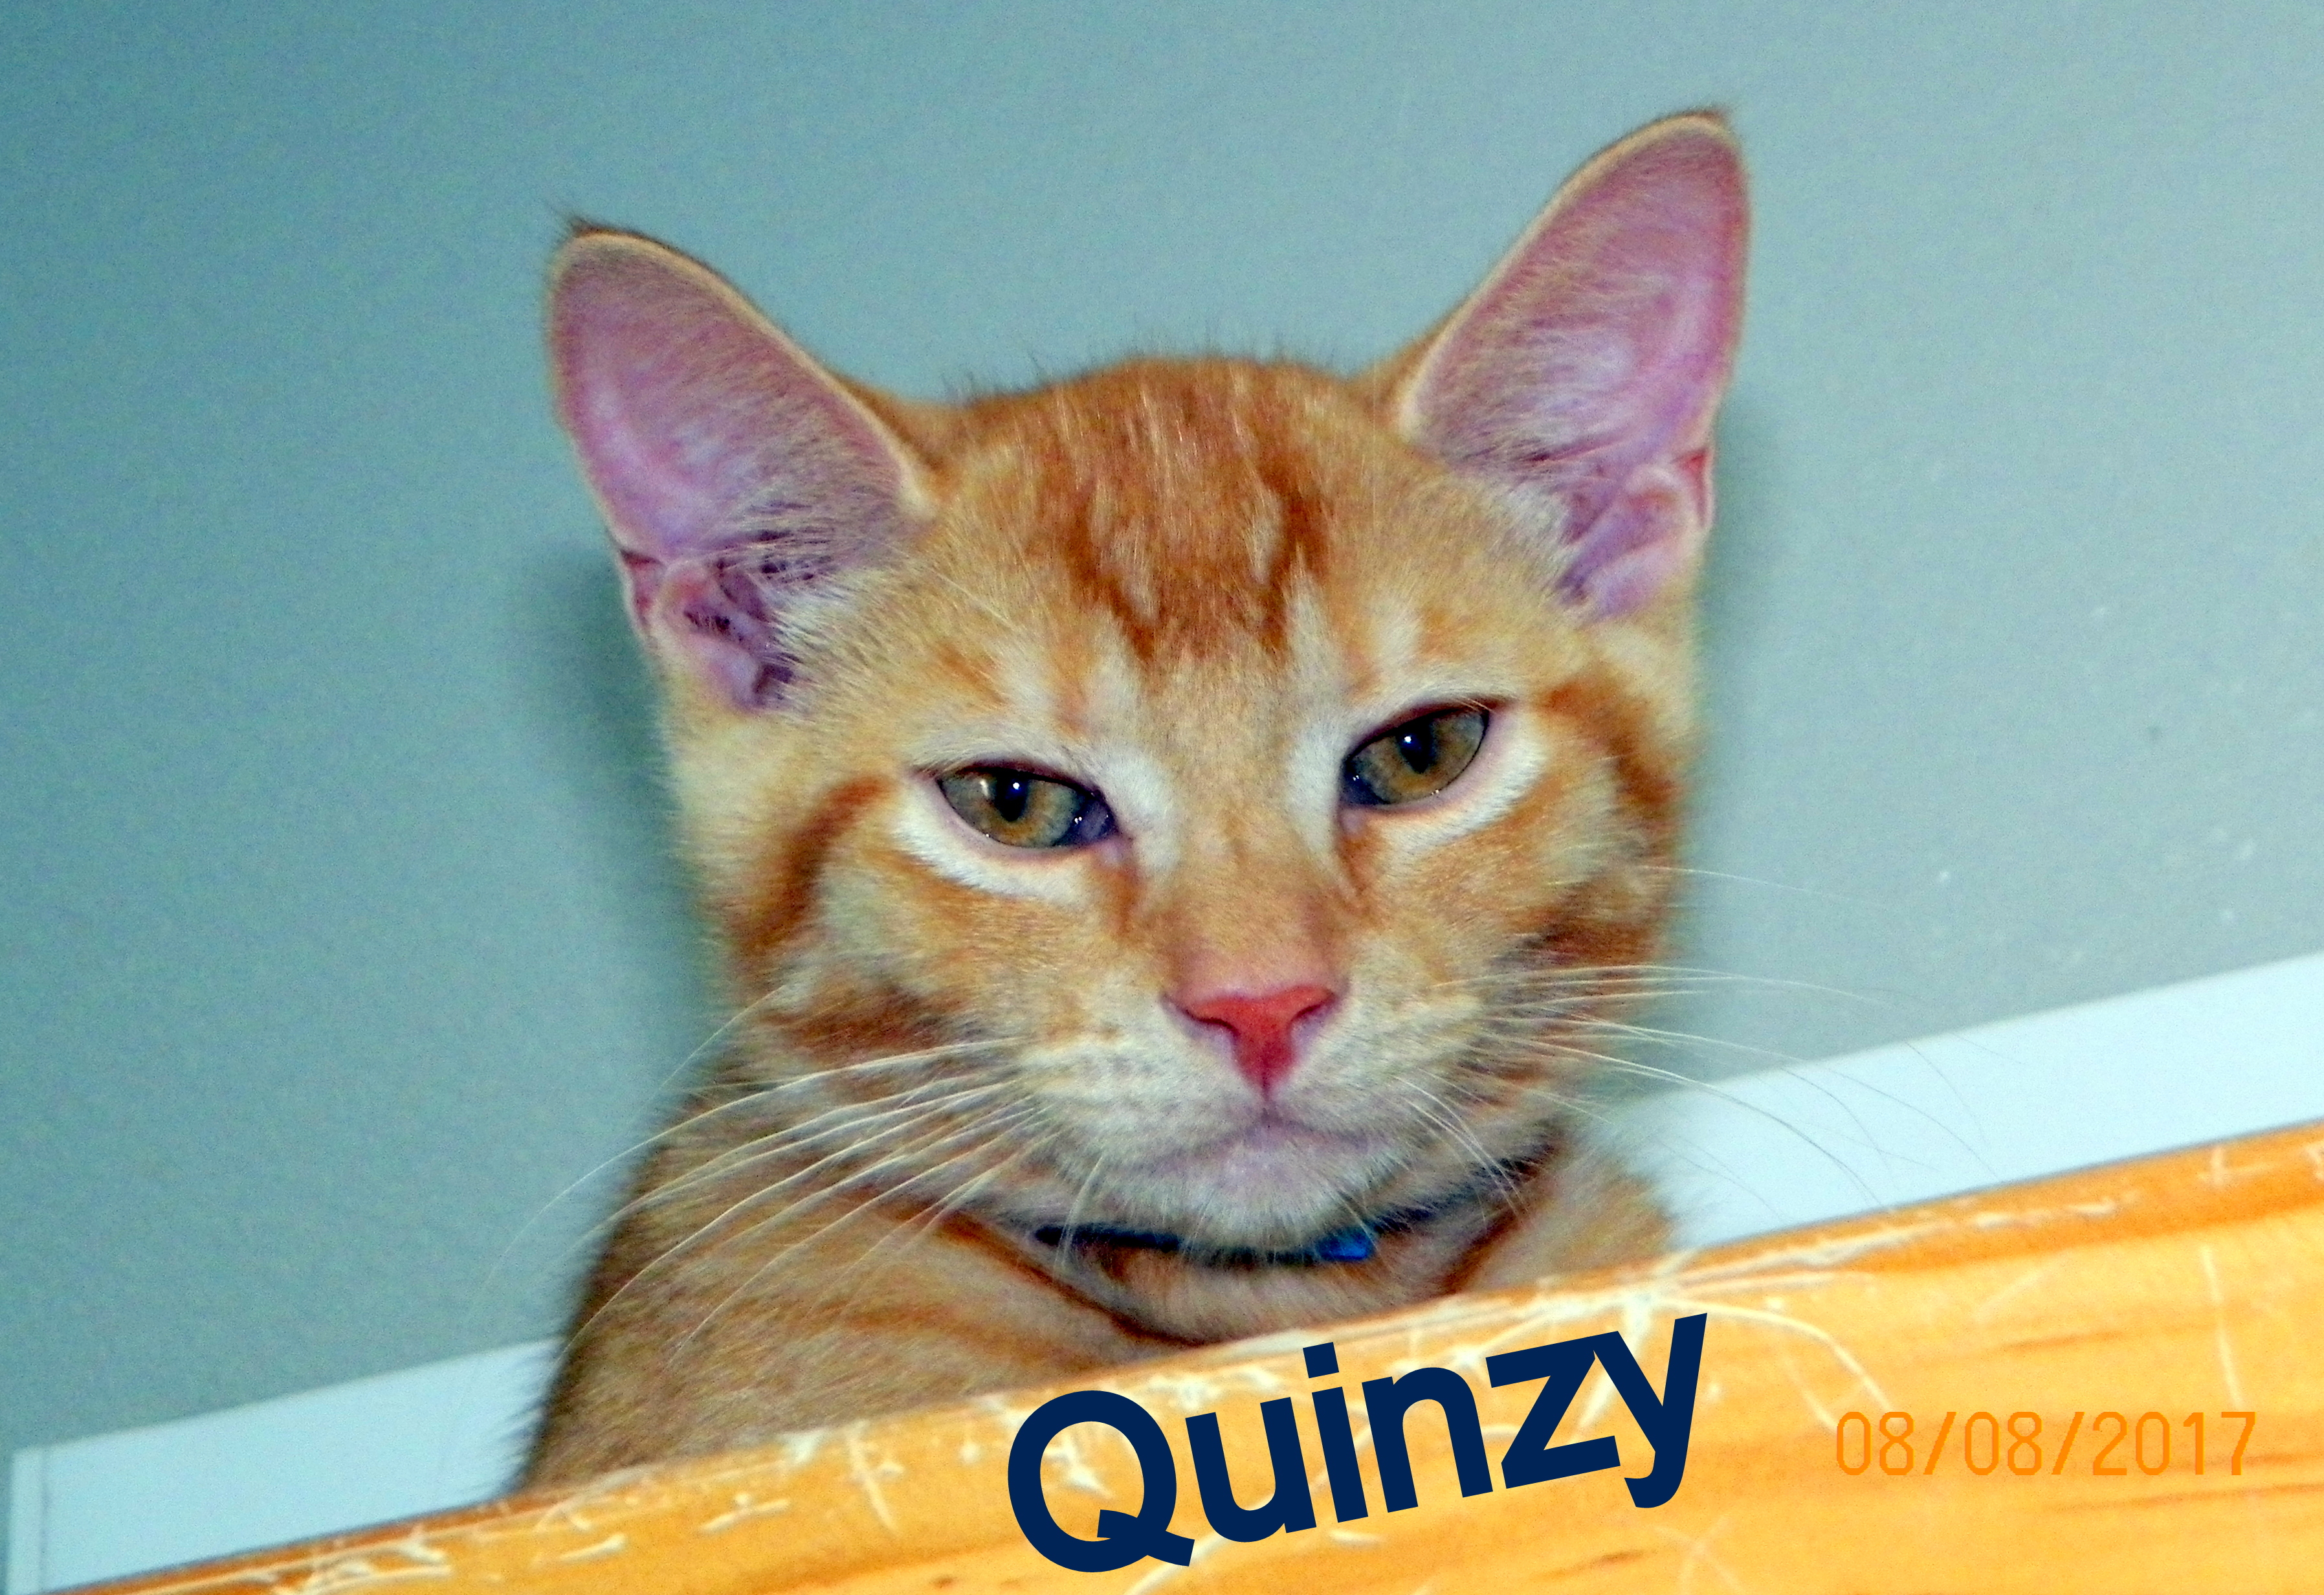 Quinzy detail page